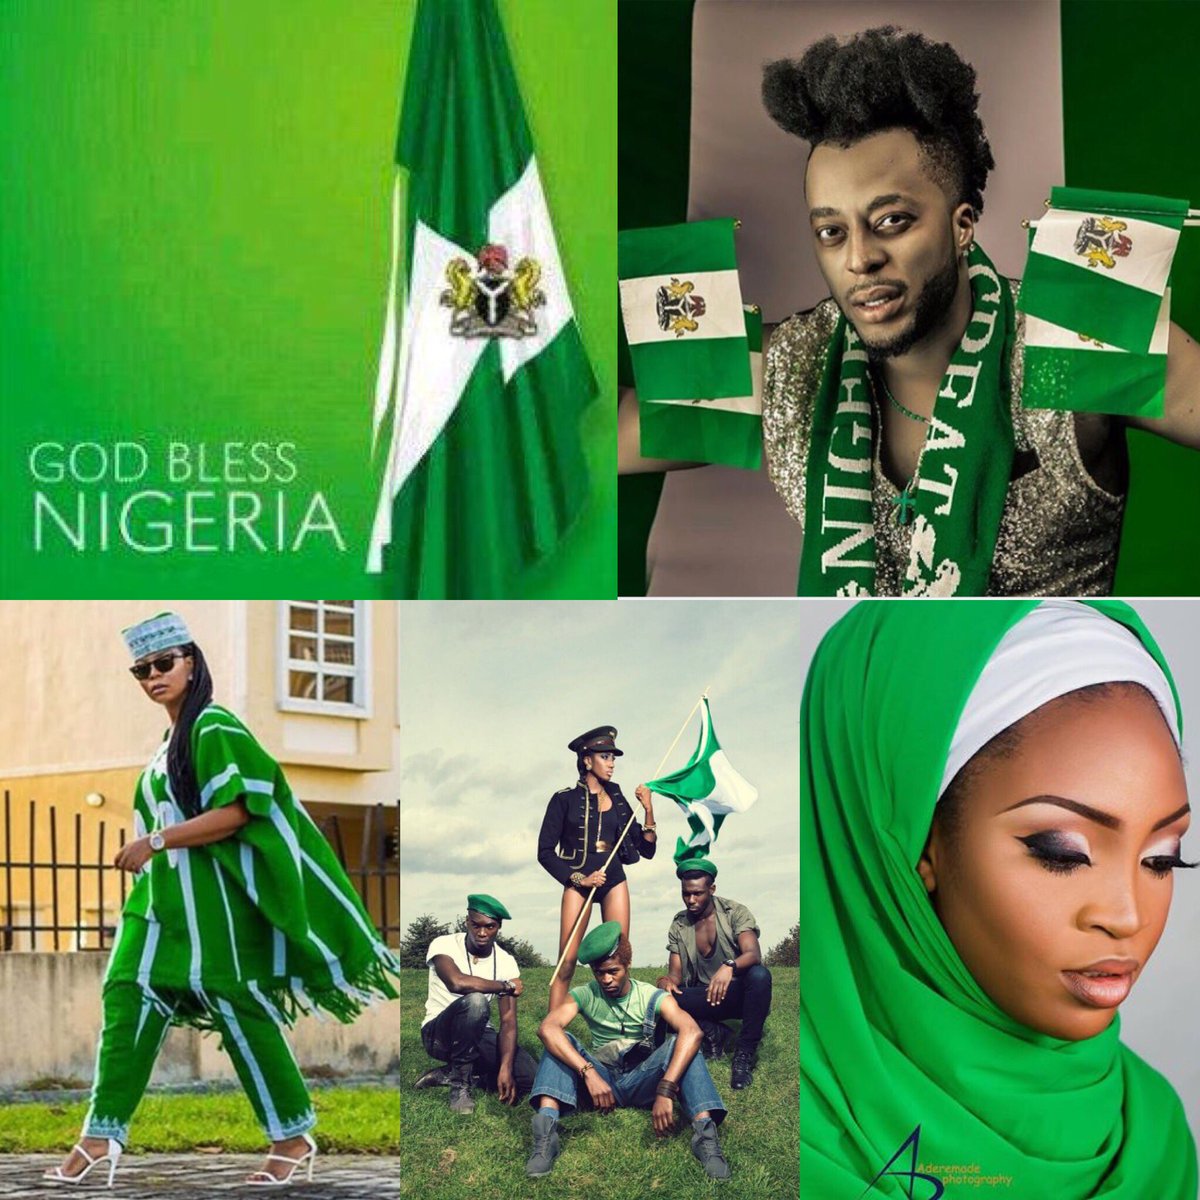 Nigeria’s image in the world is often distorted, one-dimensional view - tha...